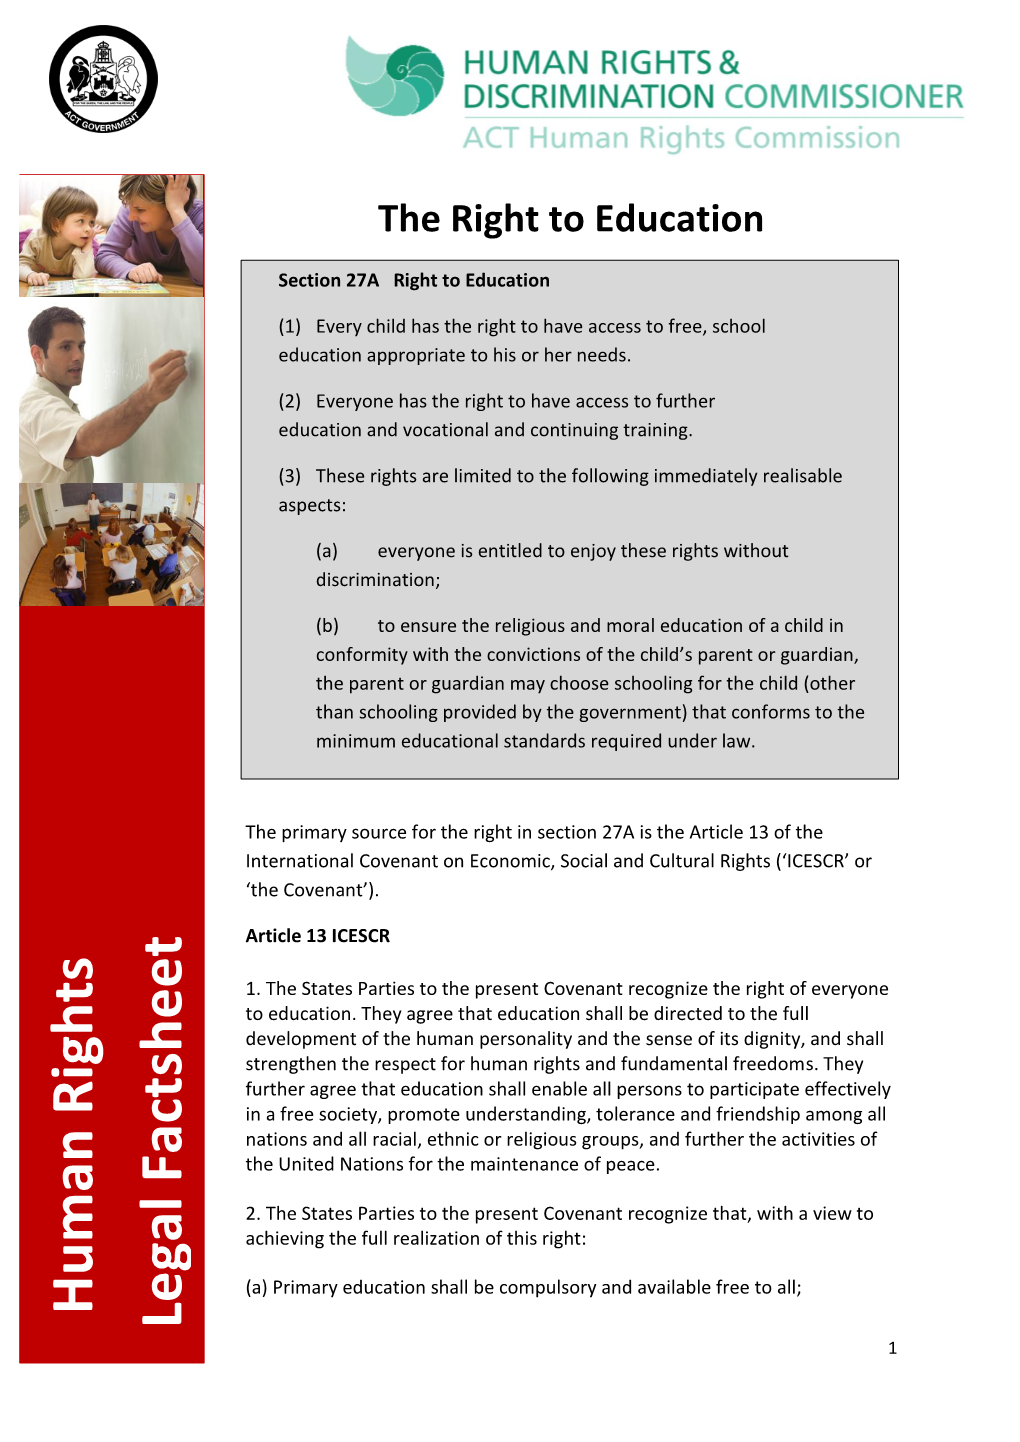 ACT Human Rights Commission on the Right to Education